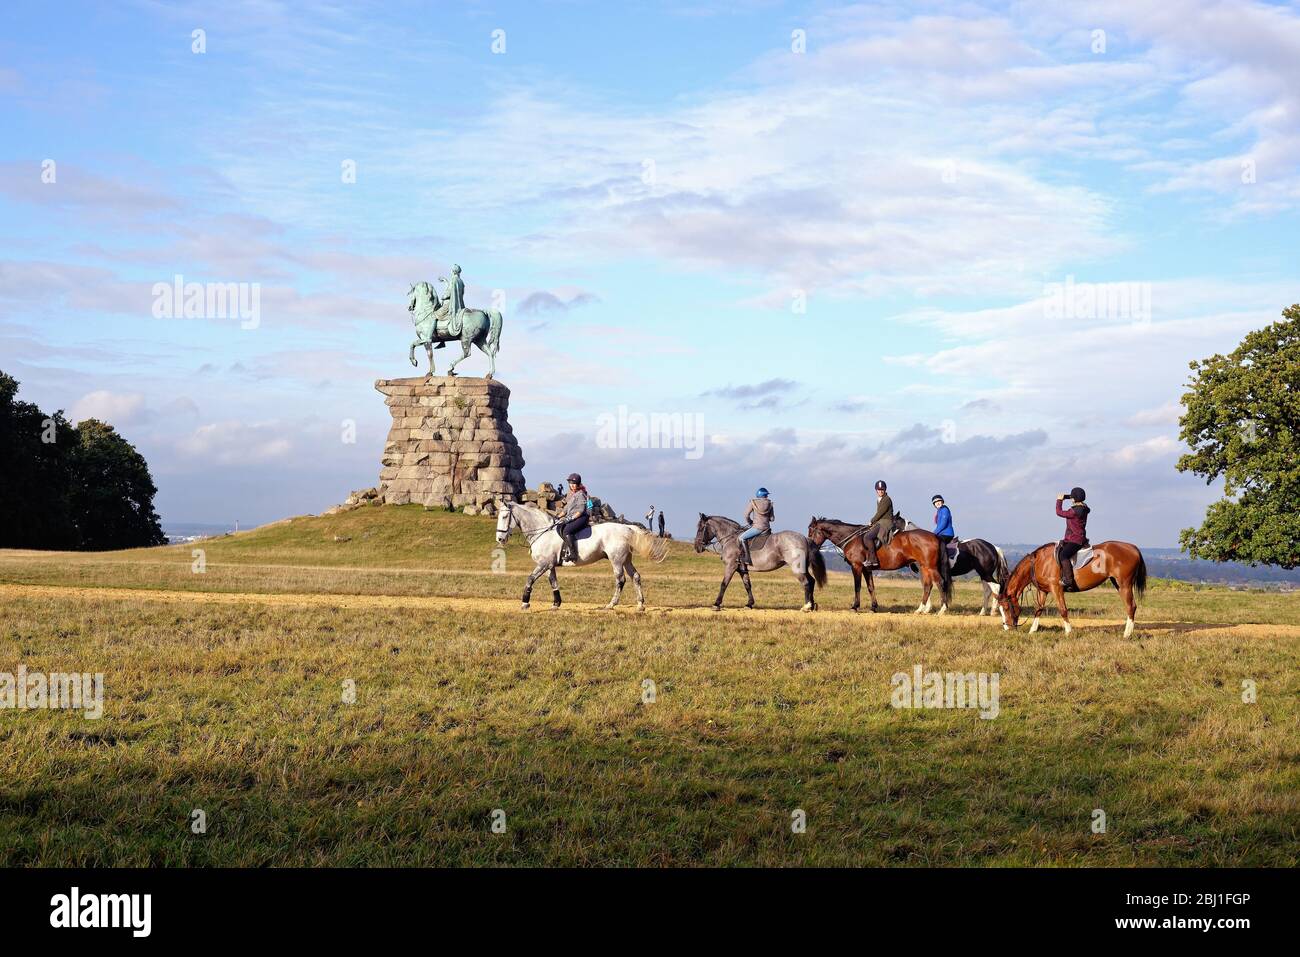 Horse riders approaching the Copper Horse equestrian statue of King George third, Snow hill Windsor Great Park Berkshire England UK Stock Photo